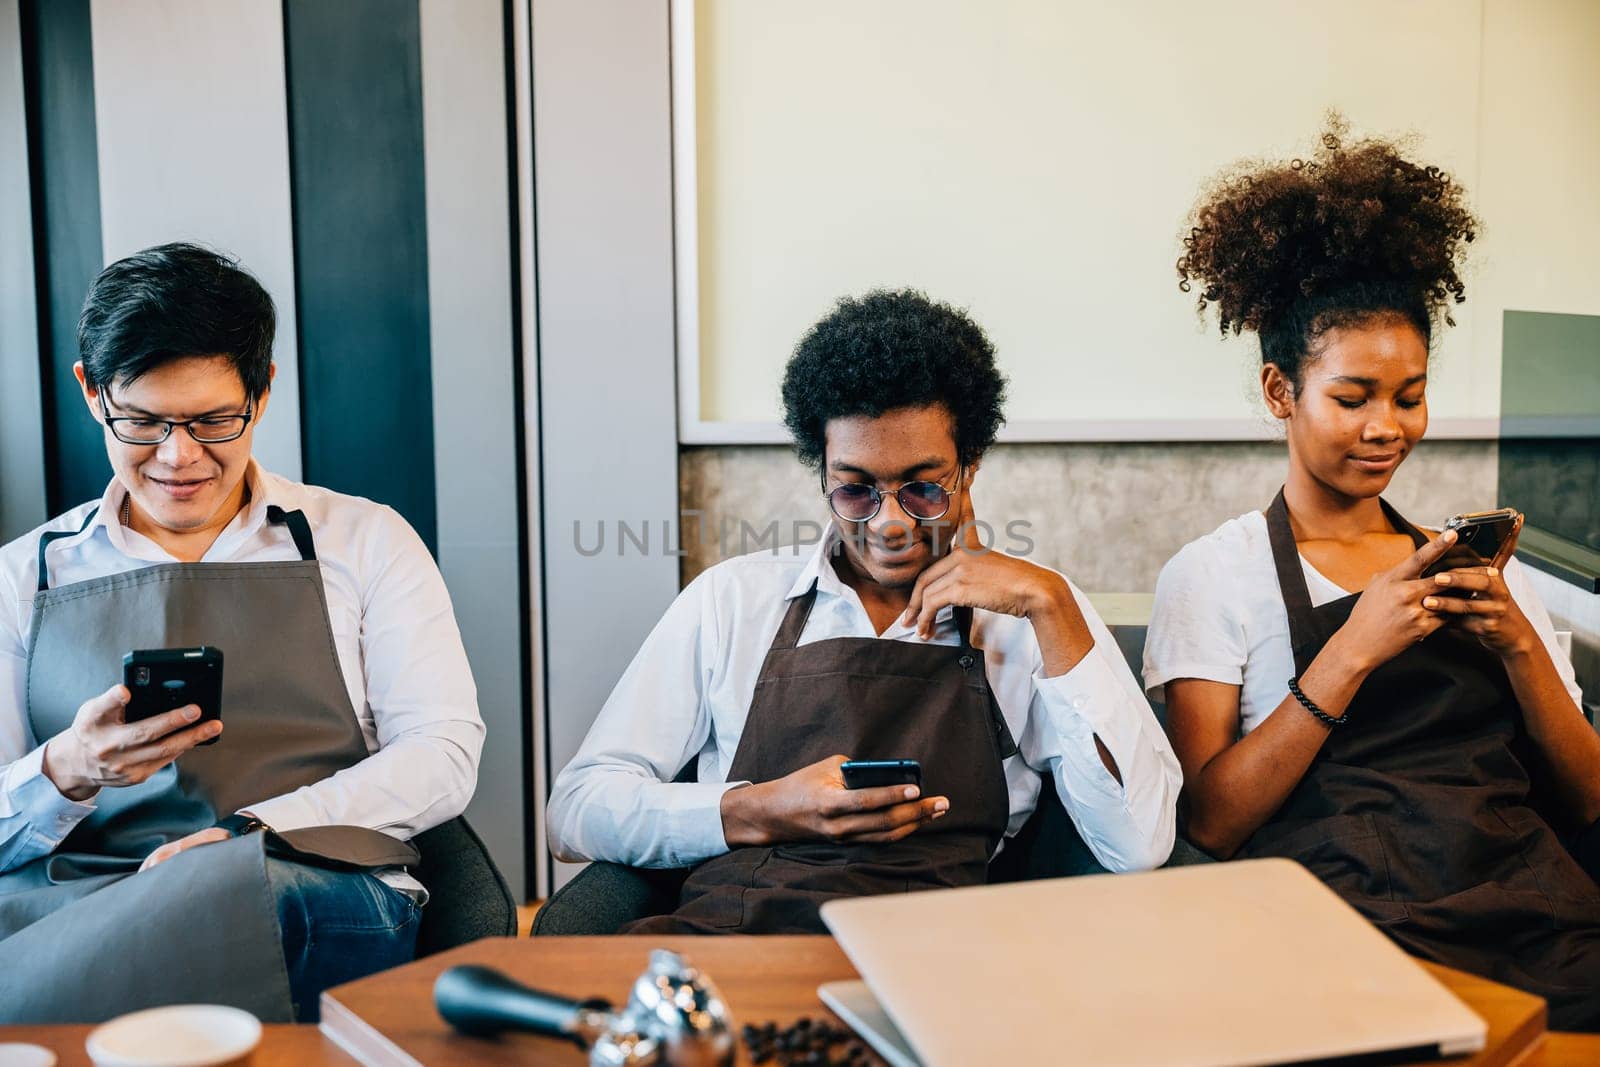 A diverse group of baristas gathered in a cafe using phones enjoying relaxation. Professionals in uniform embrace teamwork and connection through smartphone interaction. No order